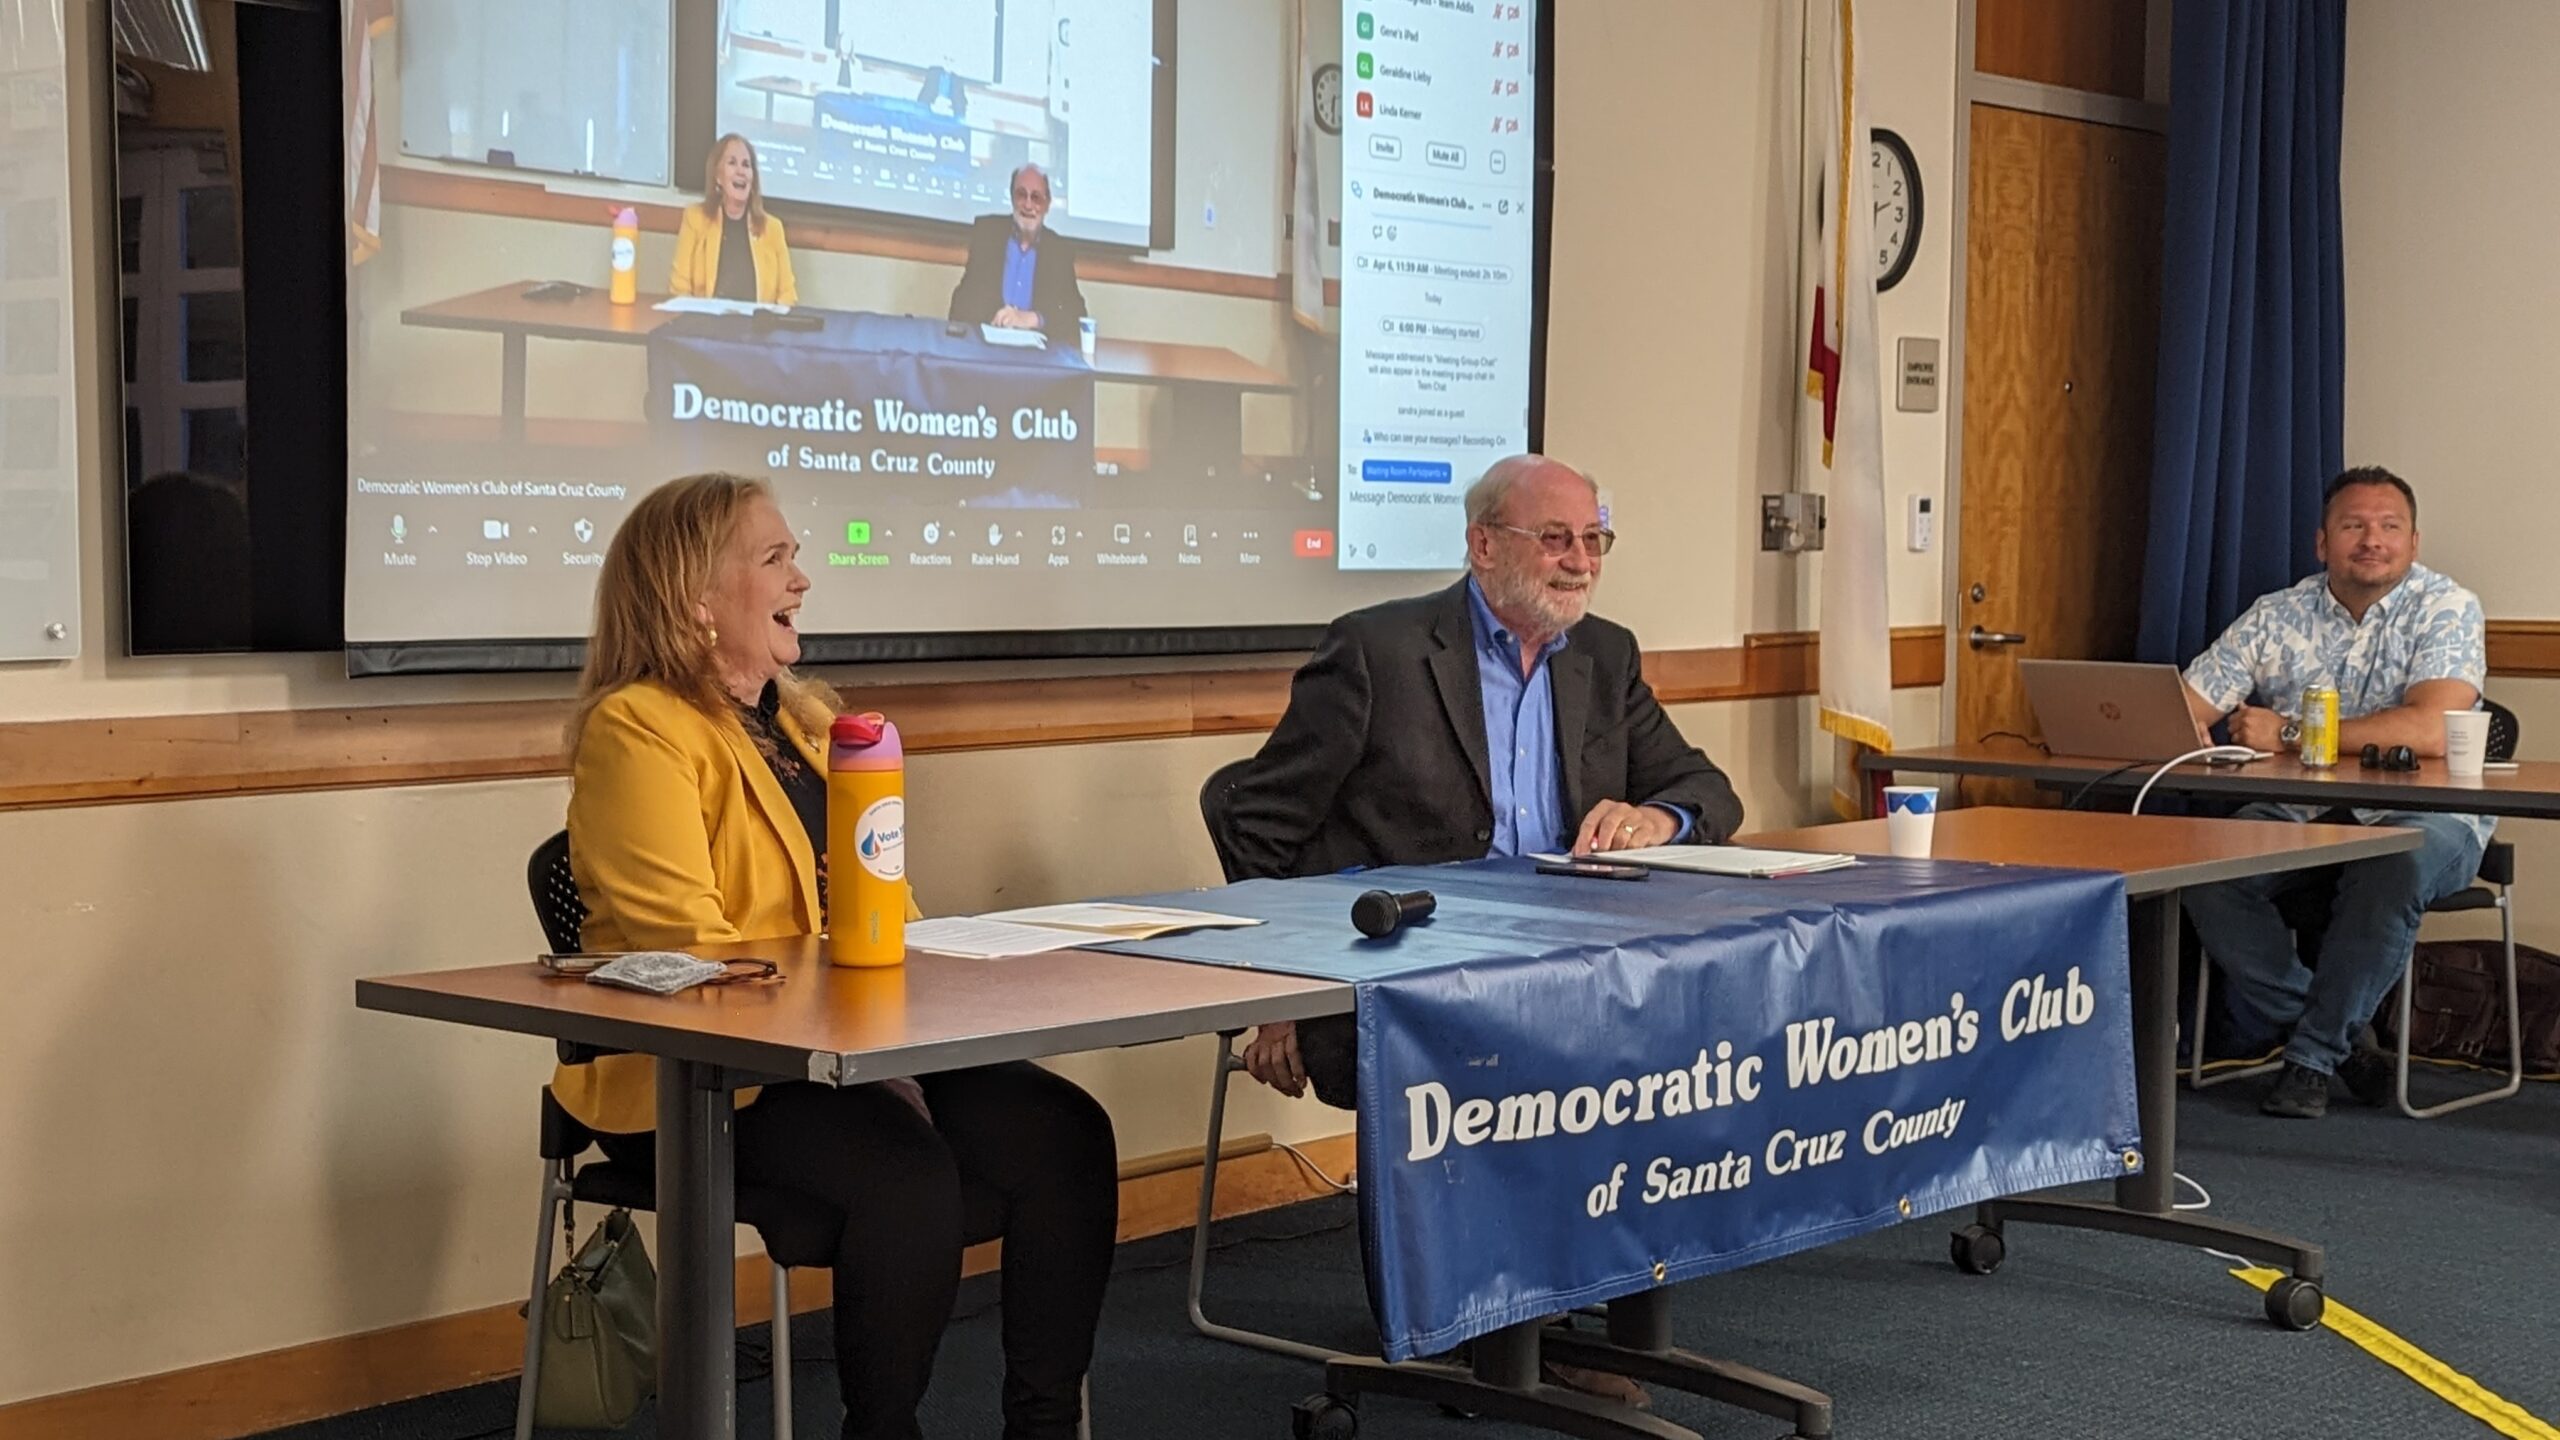 A photo of Gail Pellerin and John Laird sitting at a table with a banner hanging from the table reading "Democratic Women's Club of Santa Cruz County."